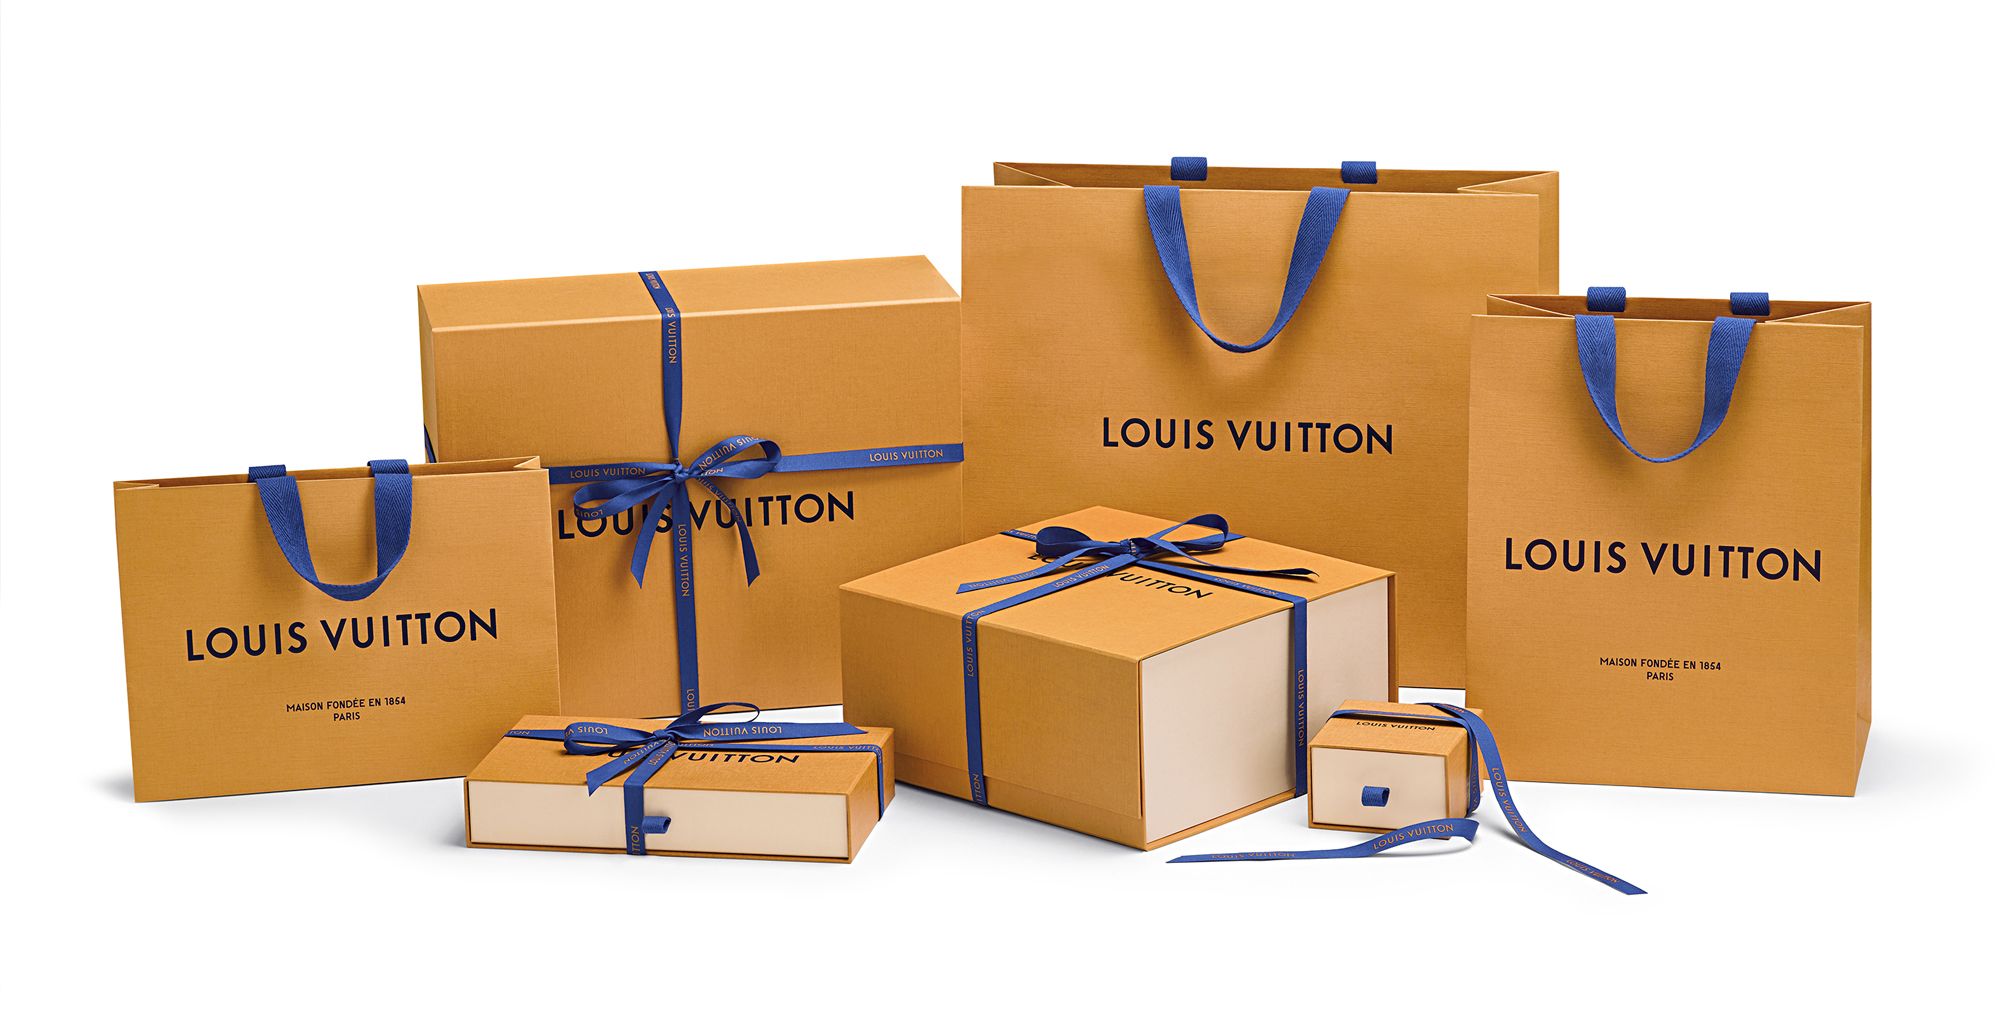 Louis Vuitton New Packaging - Louis Vuitton Gets Rid of Brown